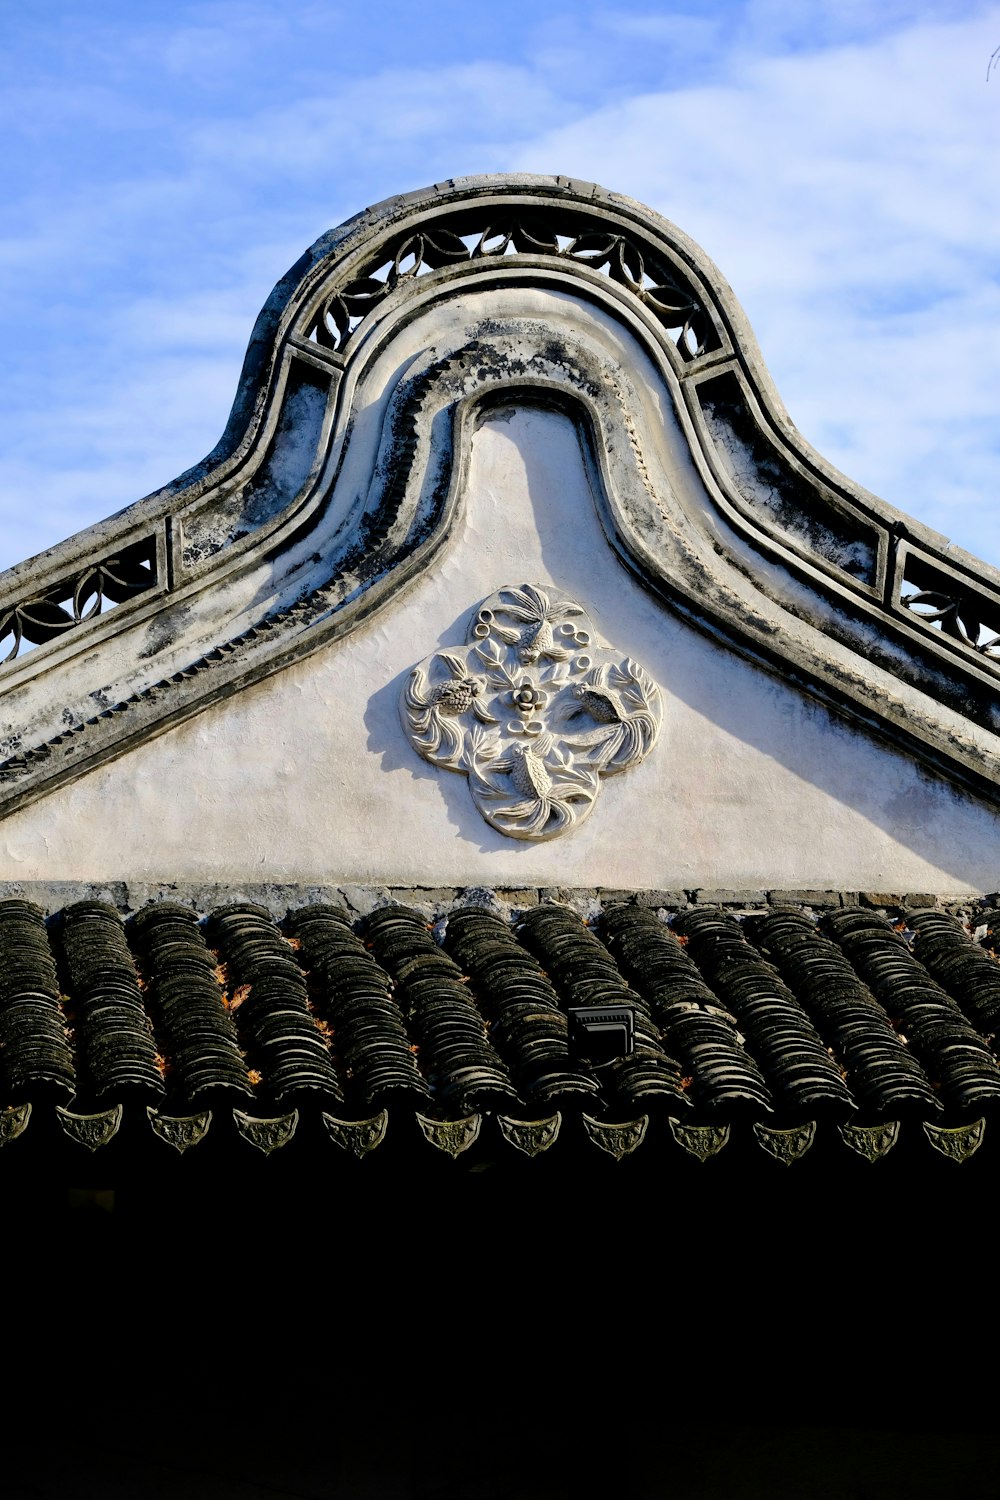 the roof of a building with a decorative decoration on it